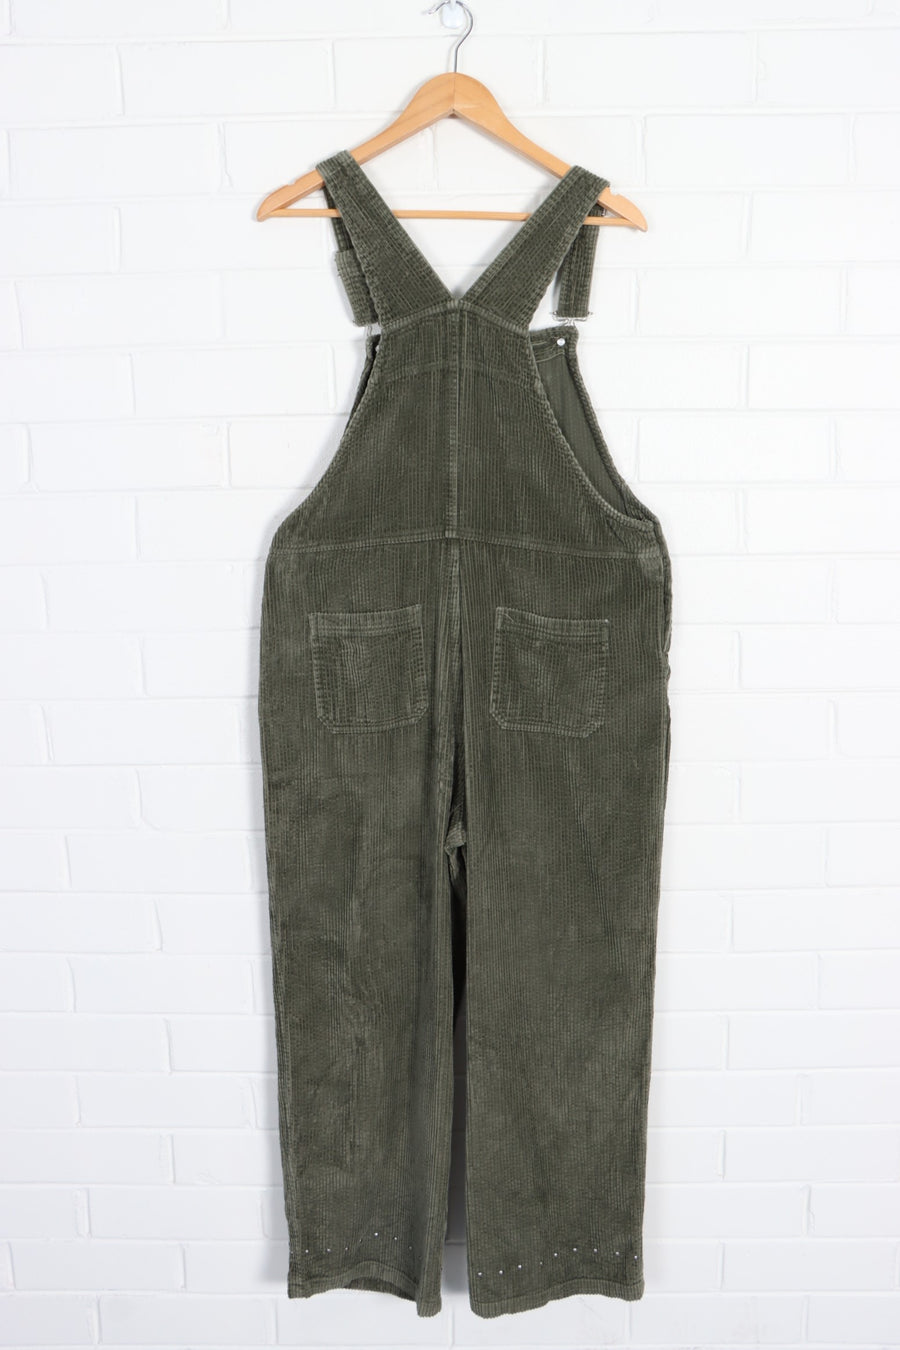 Olive Green Studded Corduroy Long Overalls (M)